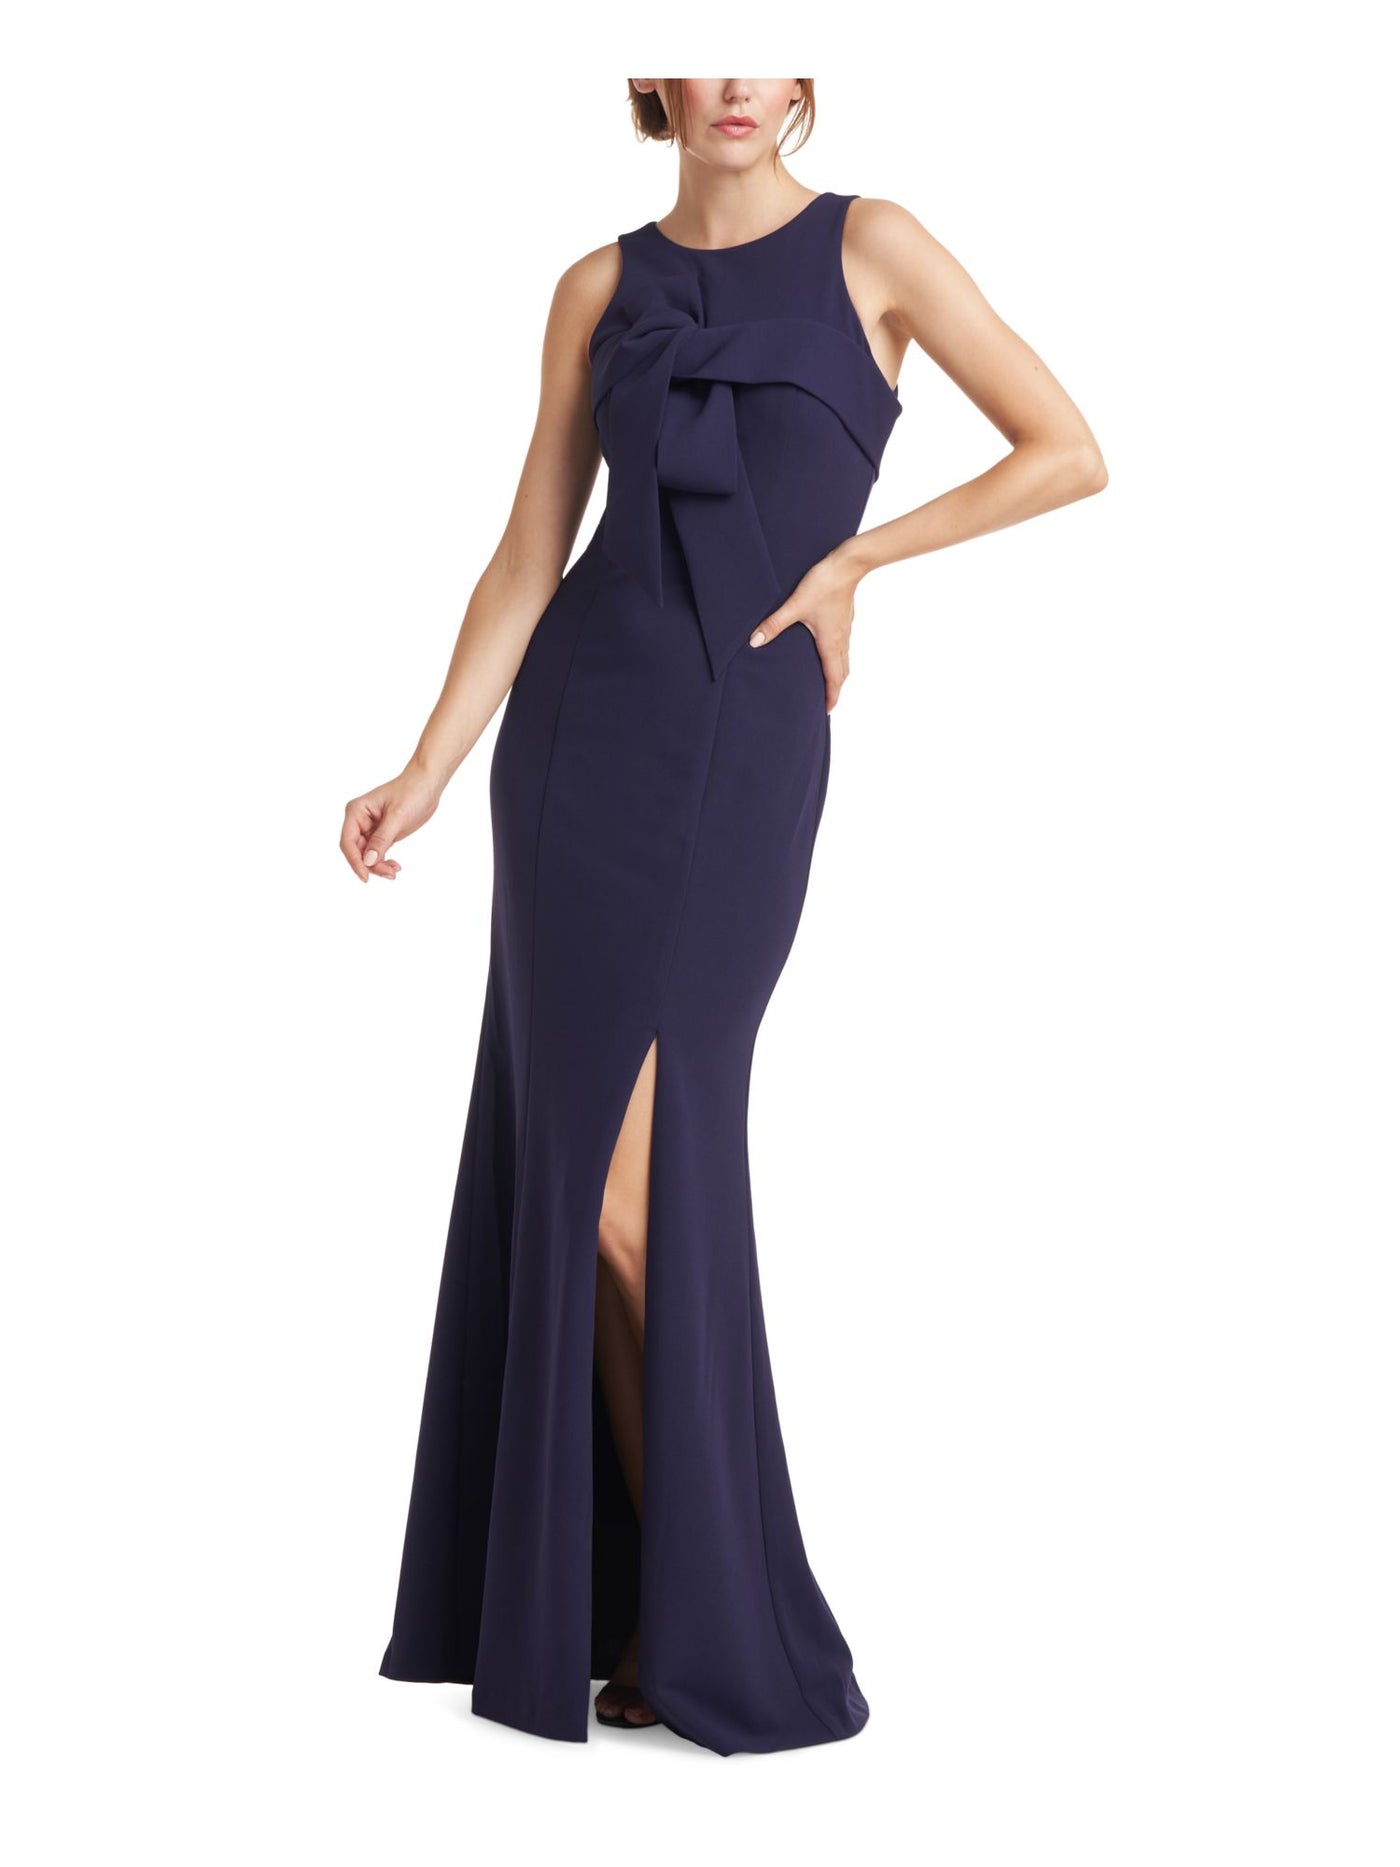 JS COLLECTION Womens Stretch Slitted Zippered Bow Detail Lined Sleeveless Jewel Neck Full-Length Formal Gown Dress